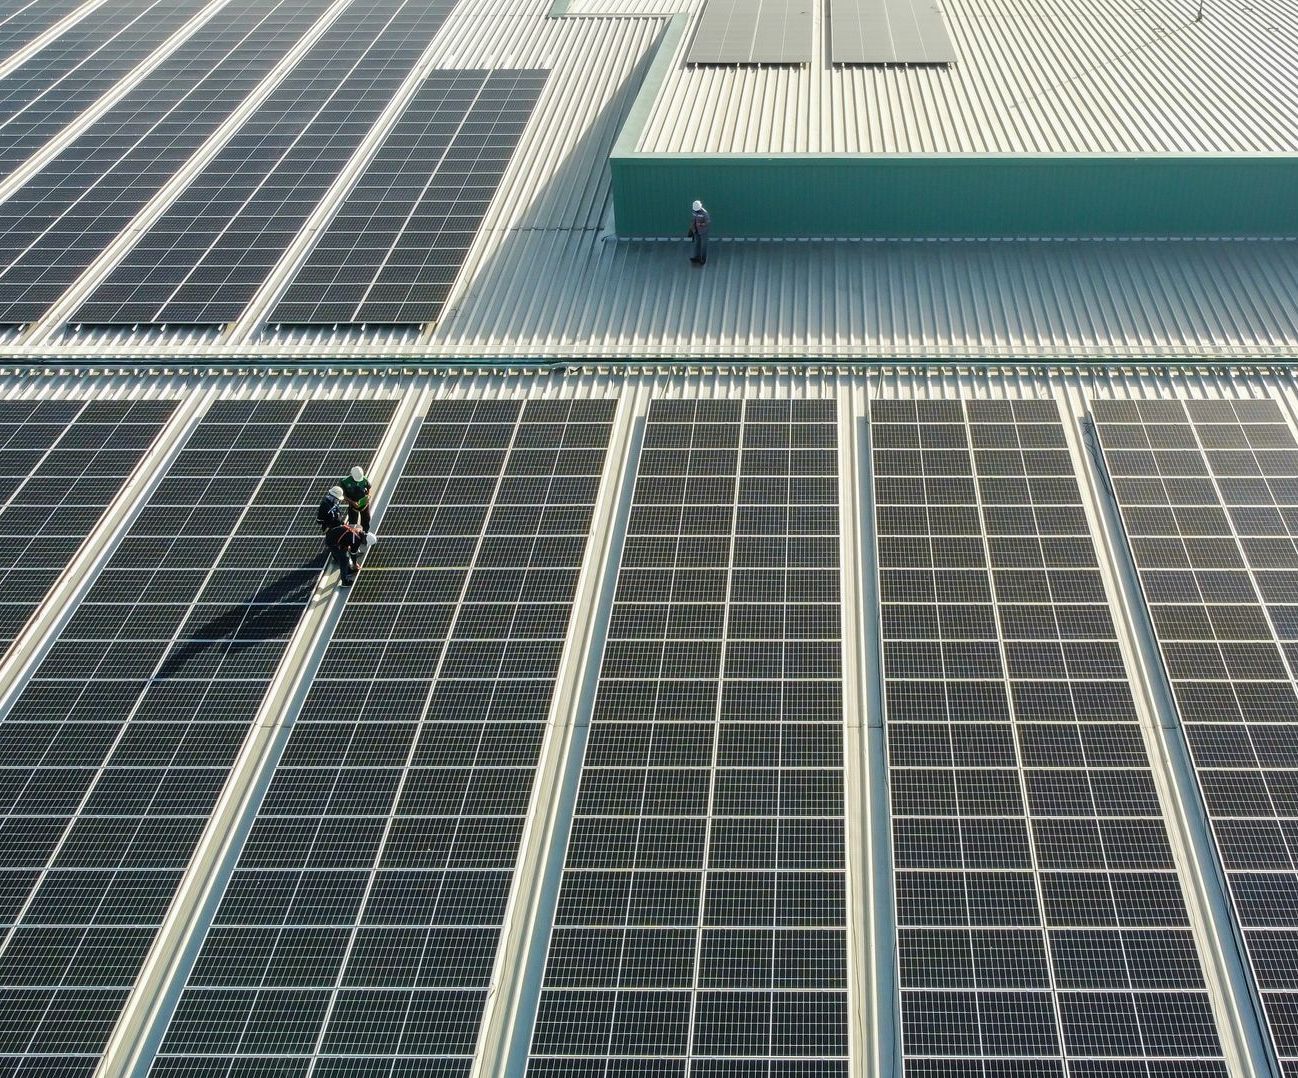 two men are working on the roof of a building with solar panels